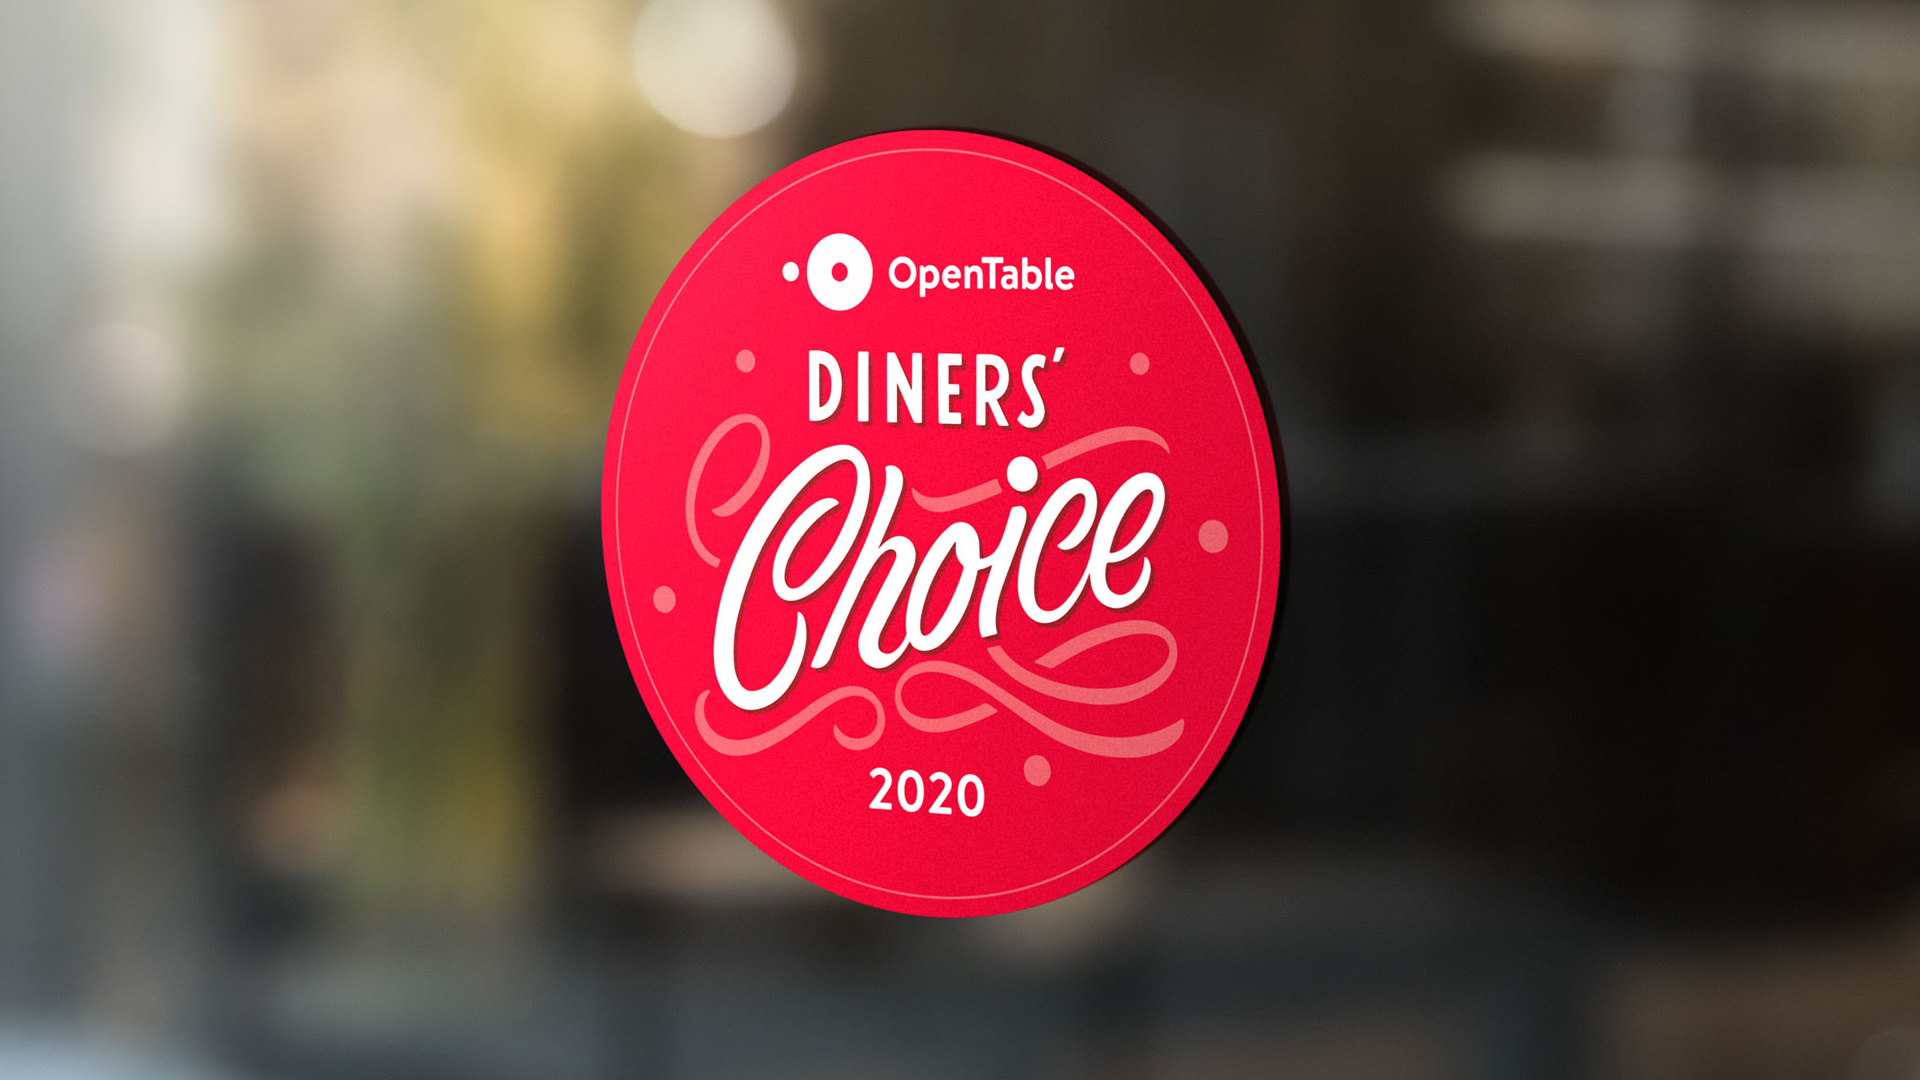 Diners' Choice Window Cling in place on a restaurant window